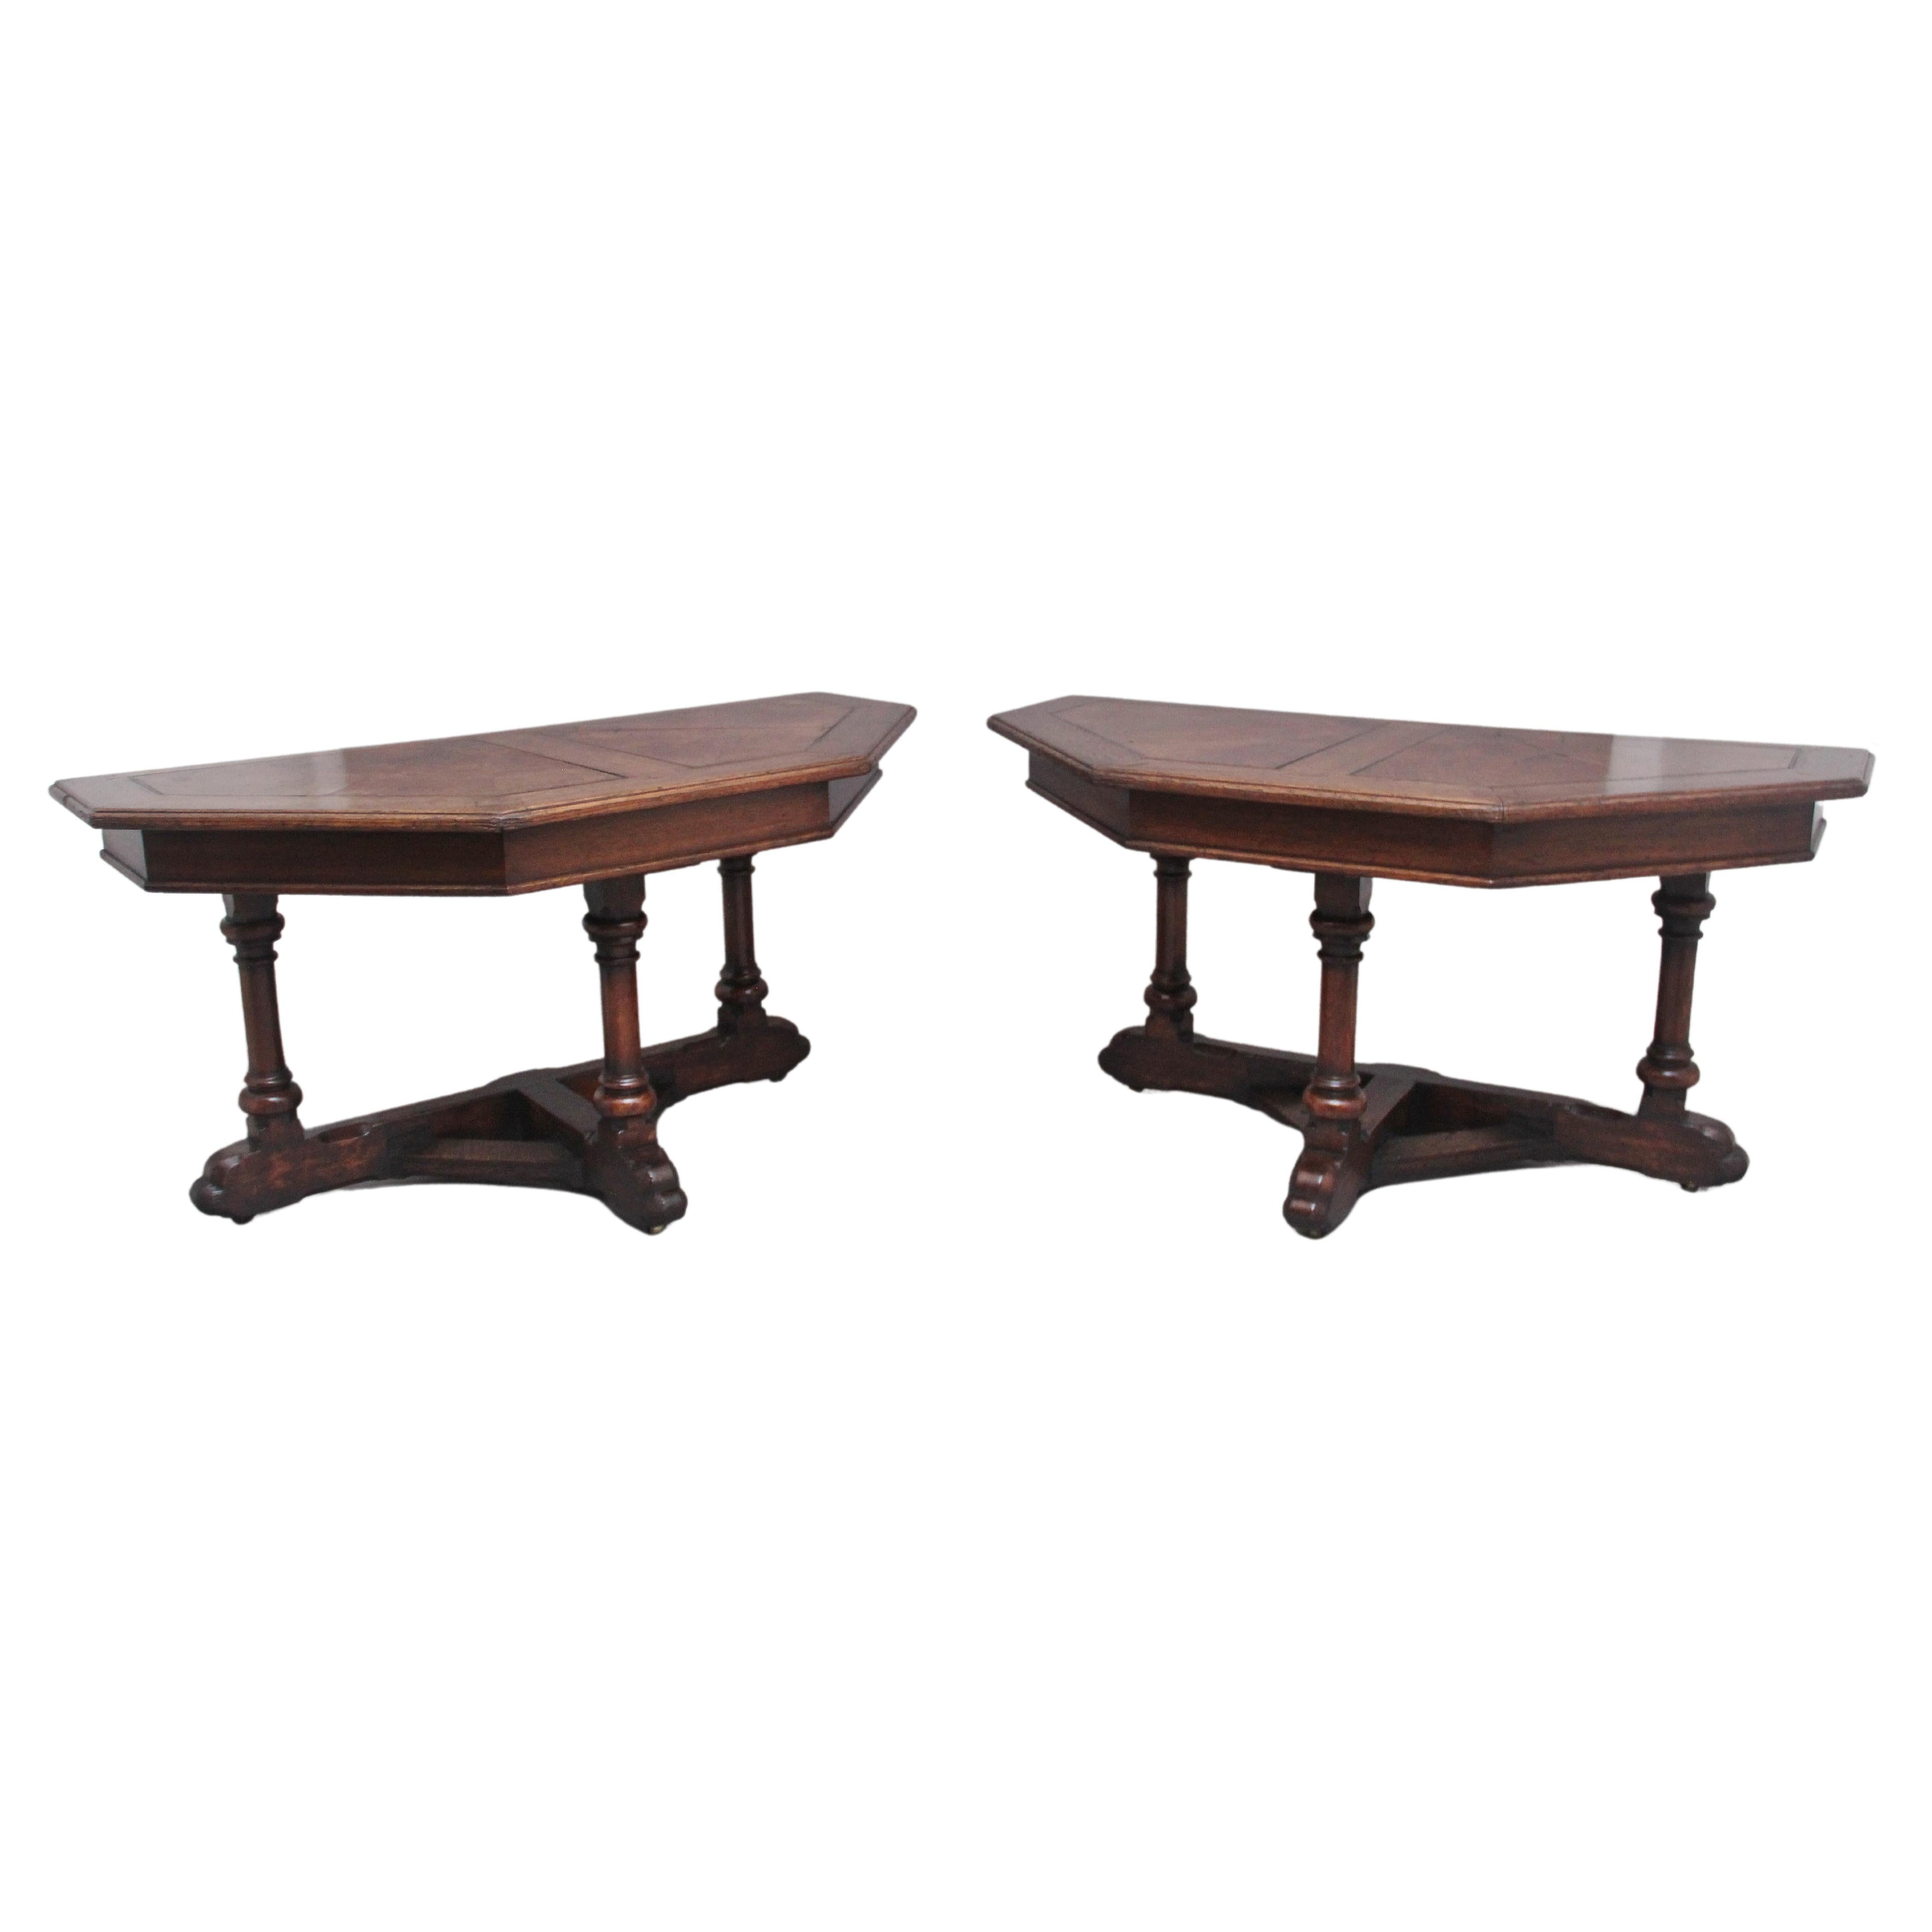 Pair of Early 19th Century Oak Console Tables For Sale